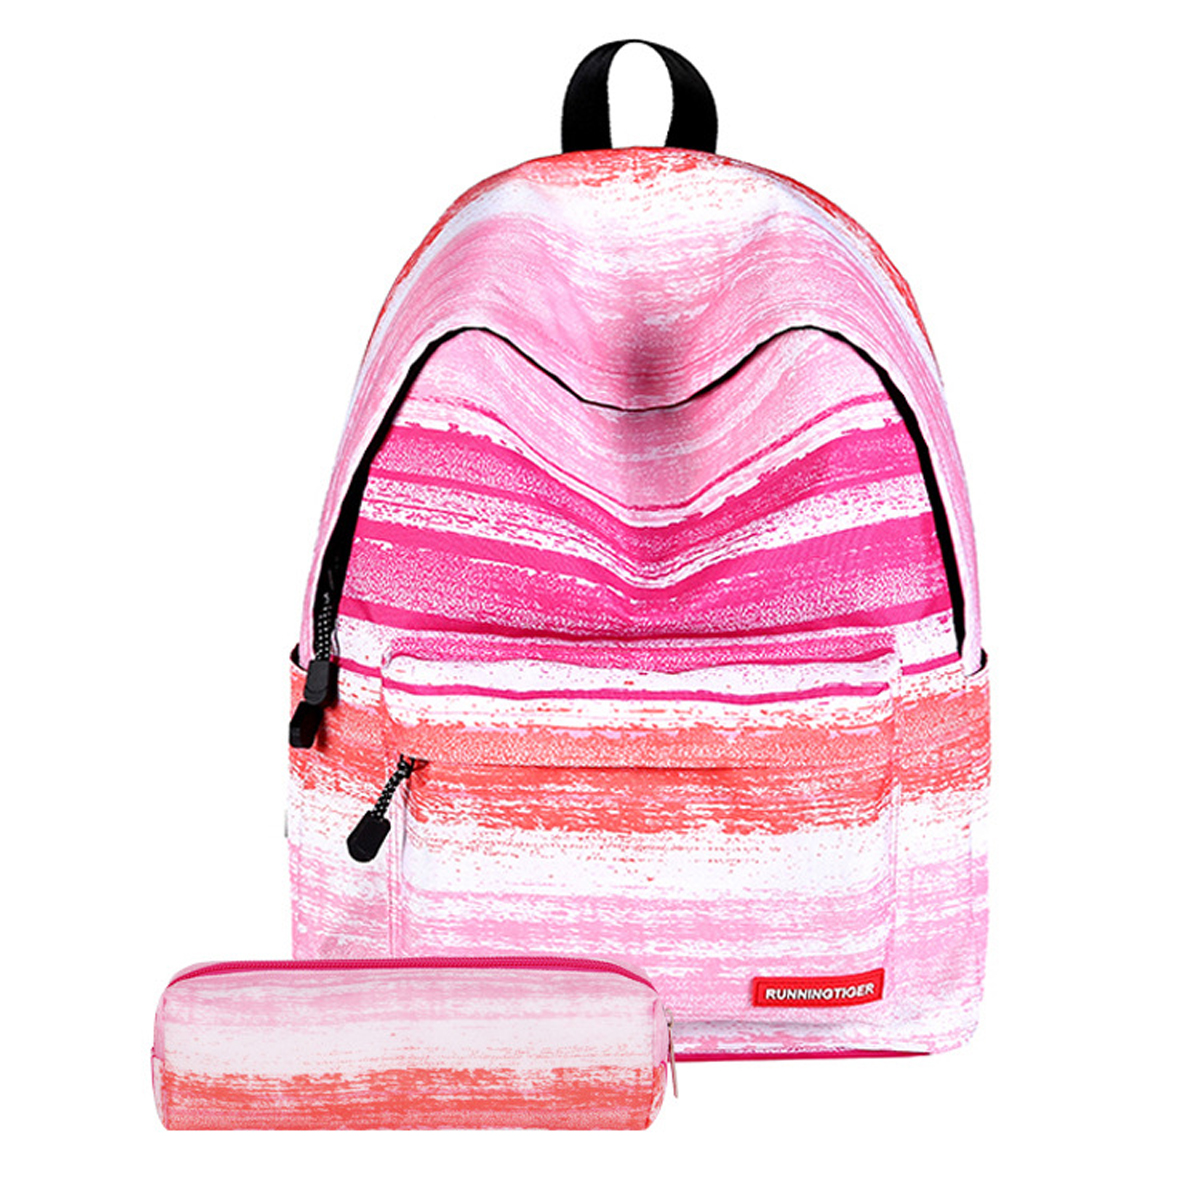 

2Pcs/Set Fashion Starry Sky Striped Canvas School Backpack Schoolbag+Matching Pencil Bag Gift for Girls Womens